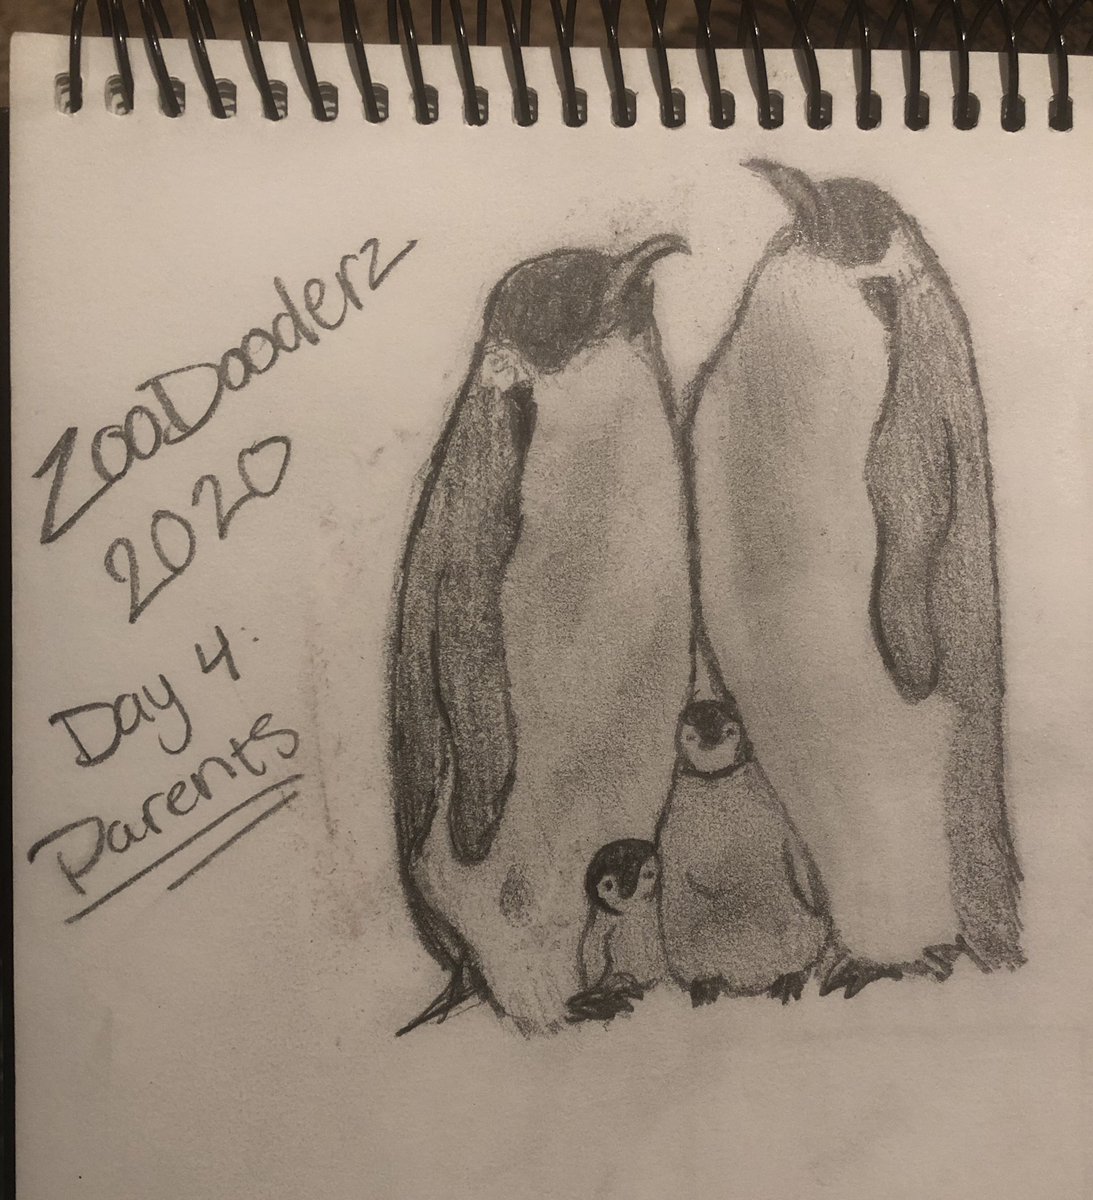 Day 4: parents I immediately thought of penguins because these birds, typically monogamous, both take part in raising the offspring. They’ve also been known to foster chicks of other mating pairs. Gay penguins have fostered and raised chicks before  